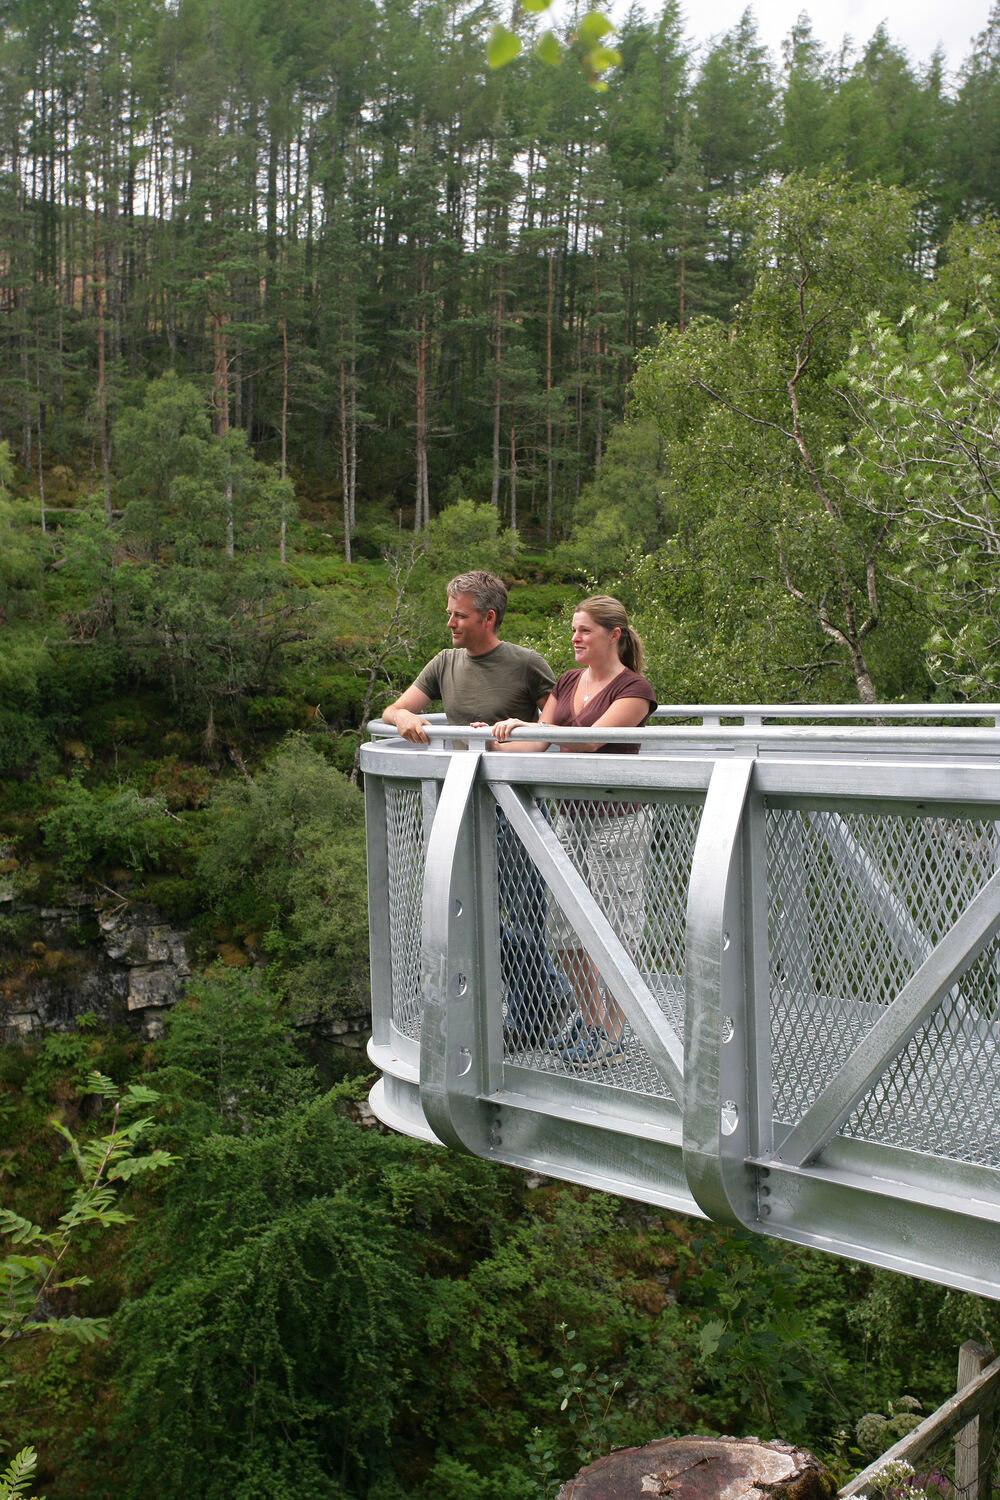 A man and a woman stand on a metal cantilevered viewing platform that sticks out over a gorge. Green trees cover the steep gorge sides.